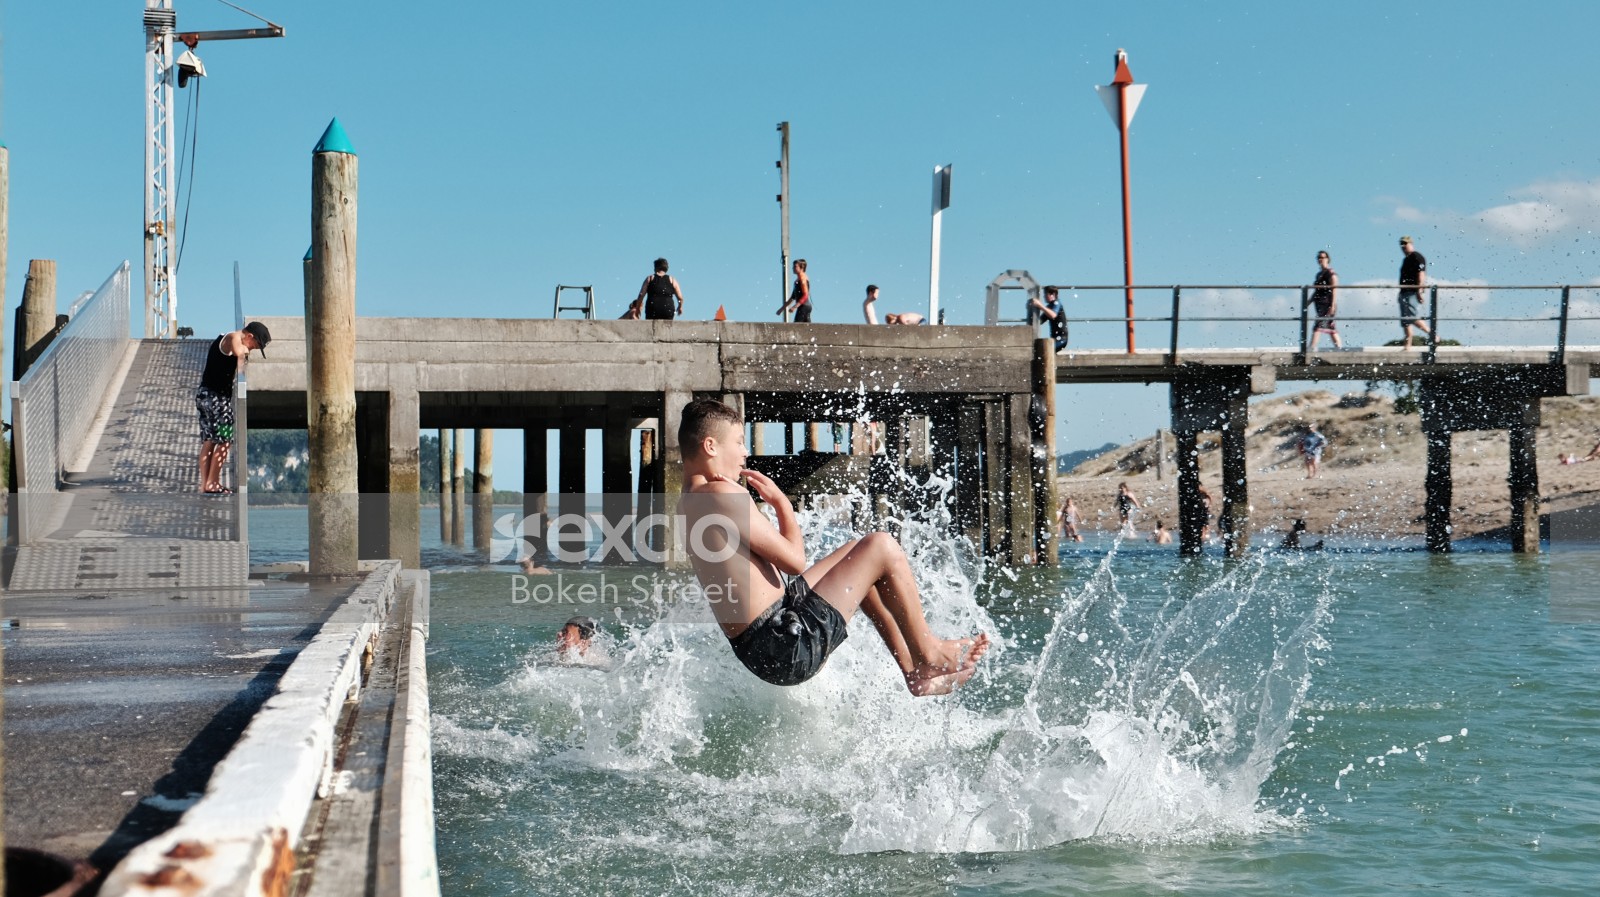 Child dive bombing from pier at the beach 